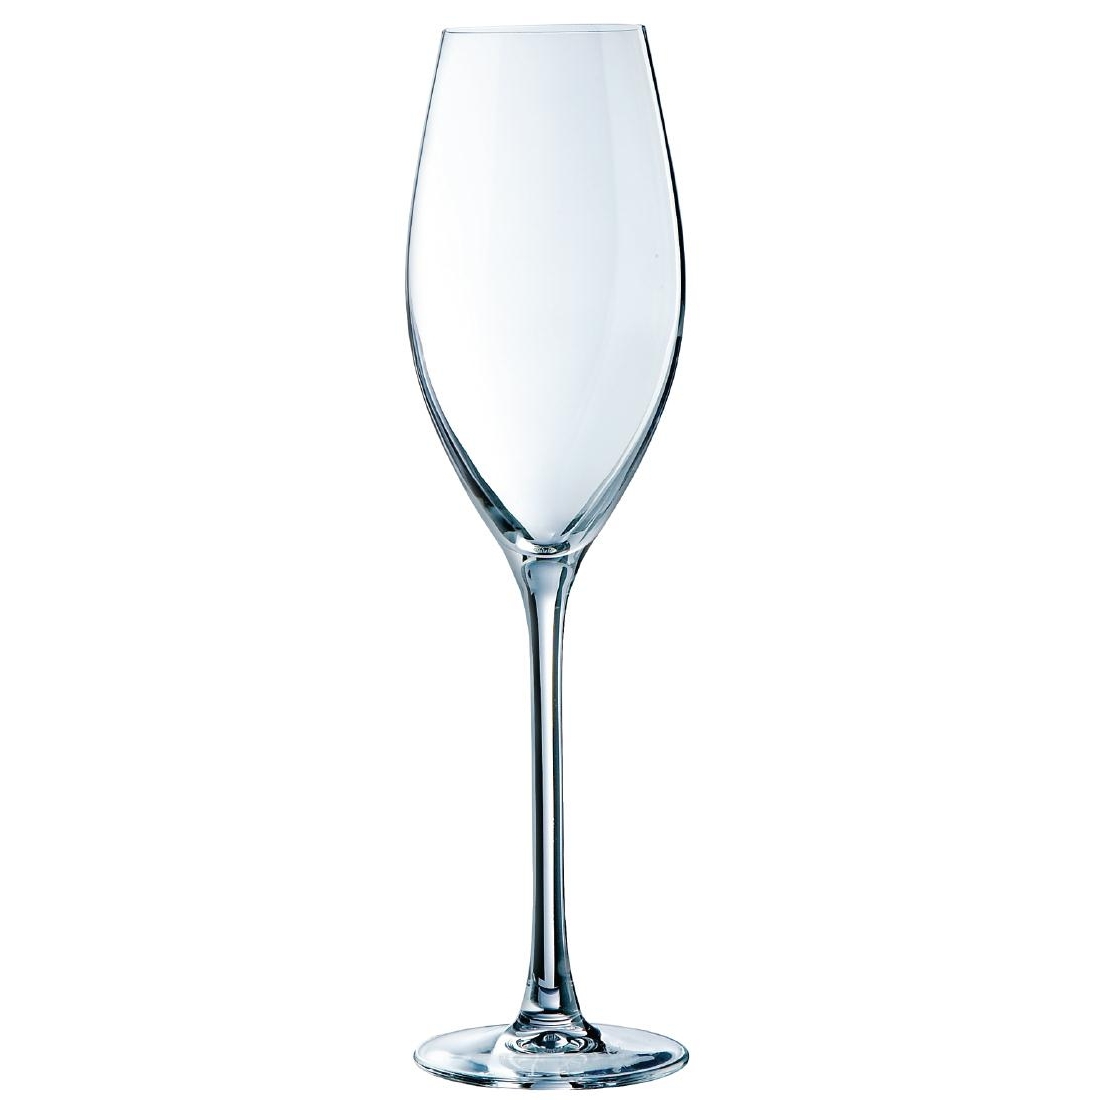 Chef & Sommelier Grand Cepages Champagne Flutes 240ml